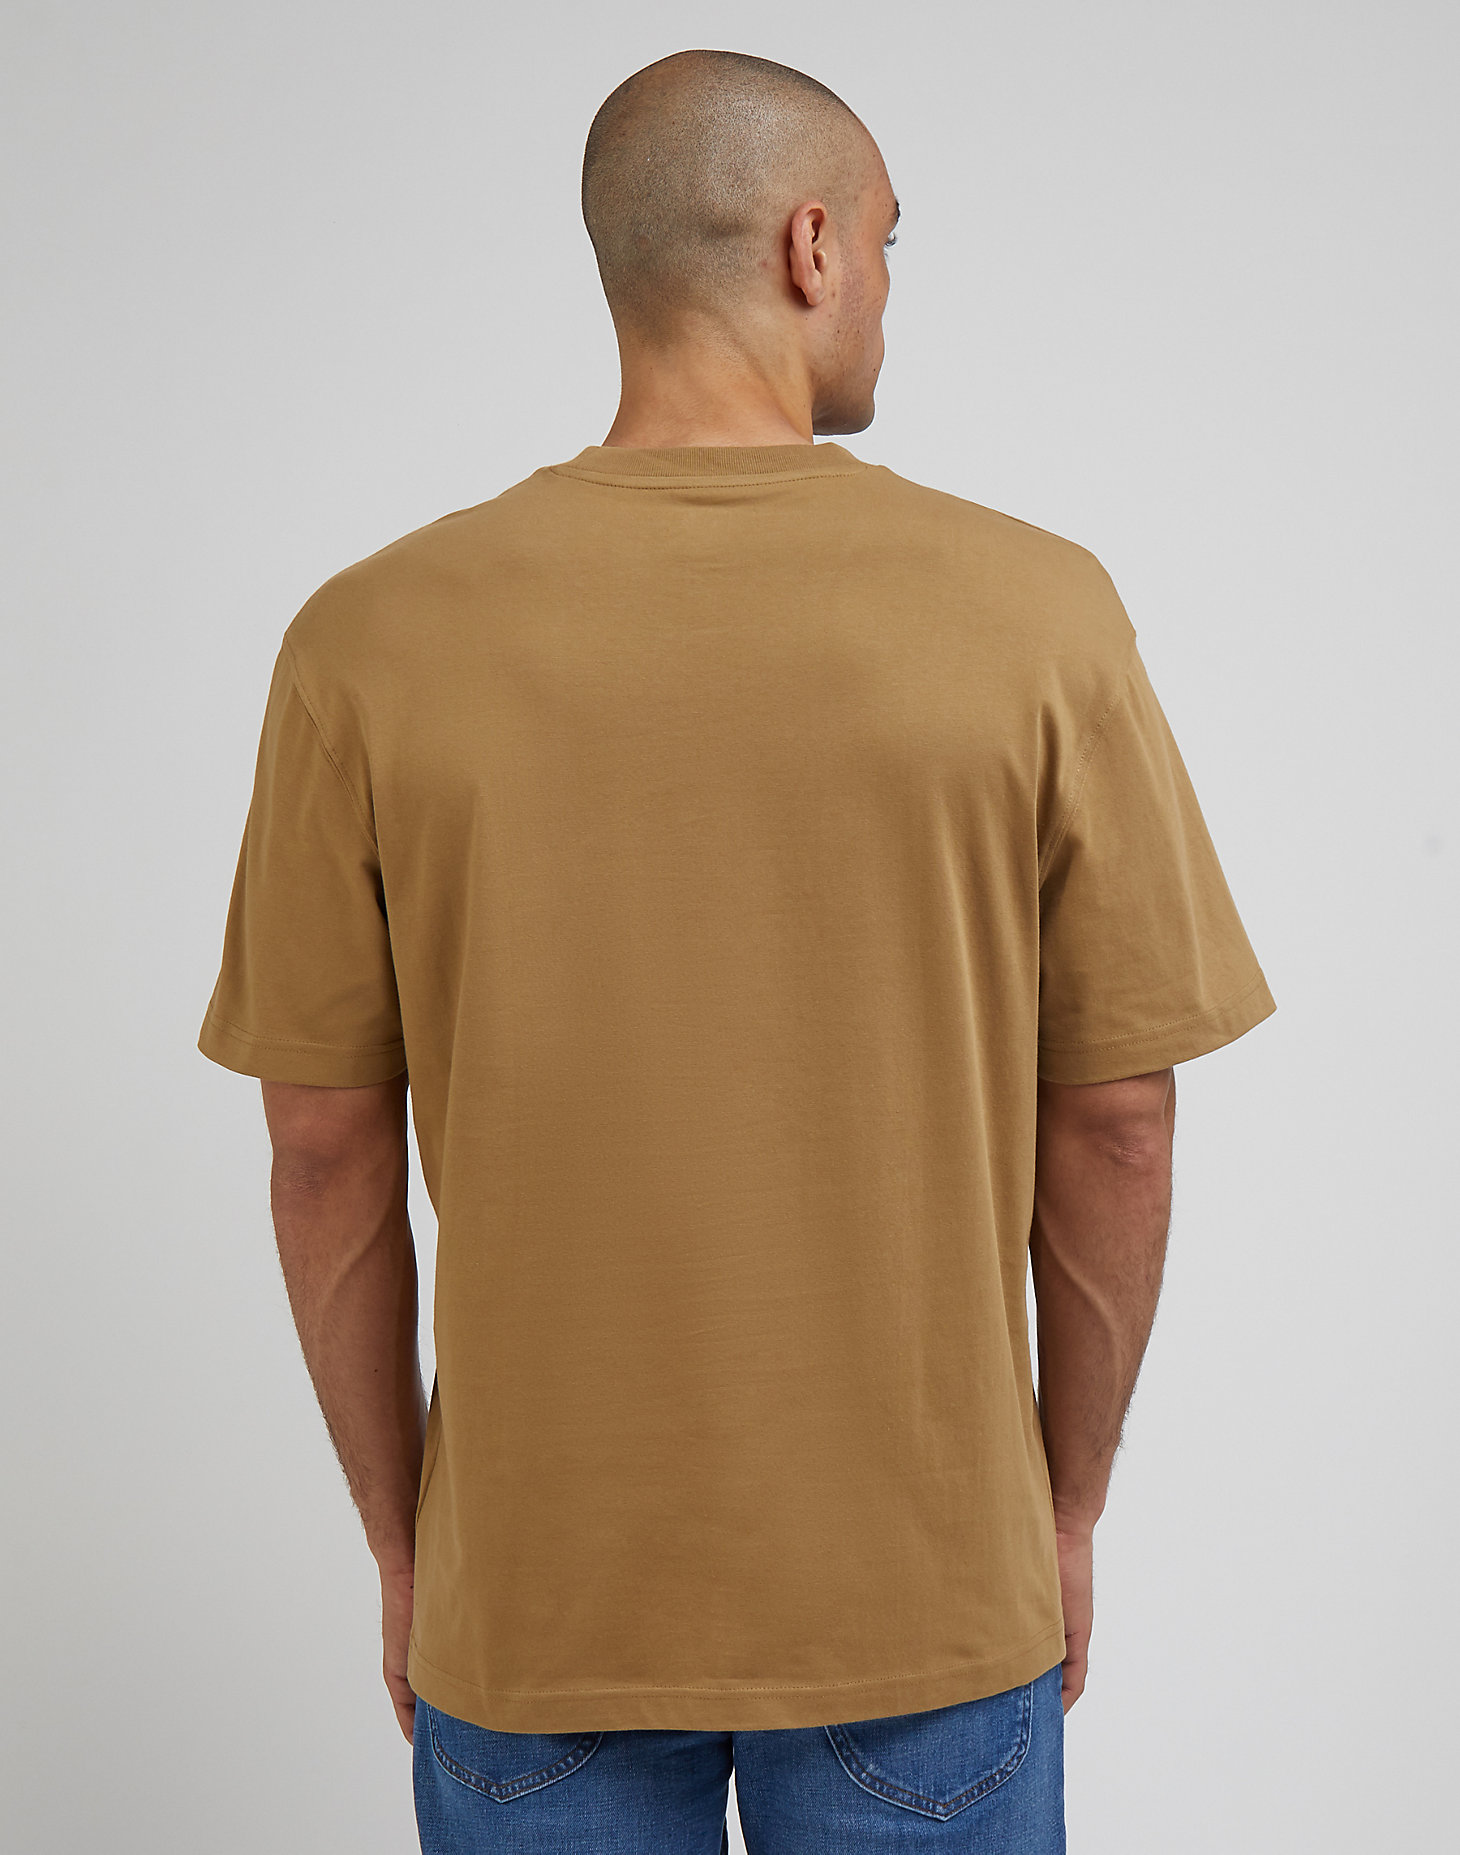 Plain Loose Tee in Clay alternative view 1